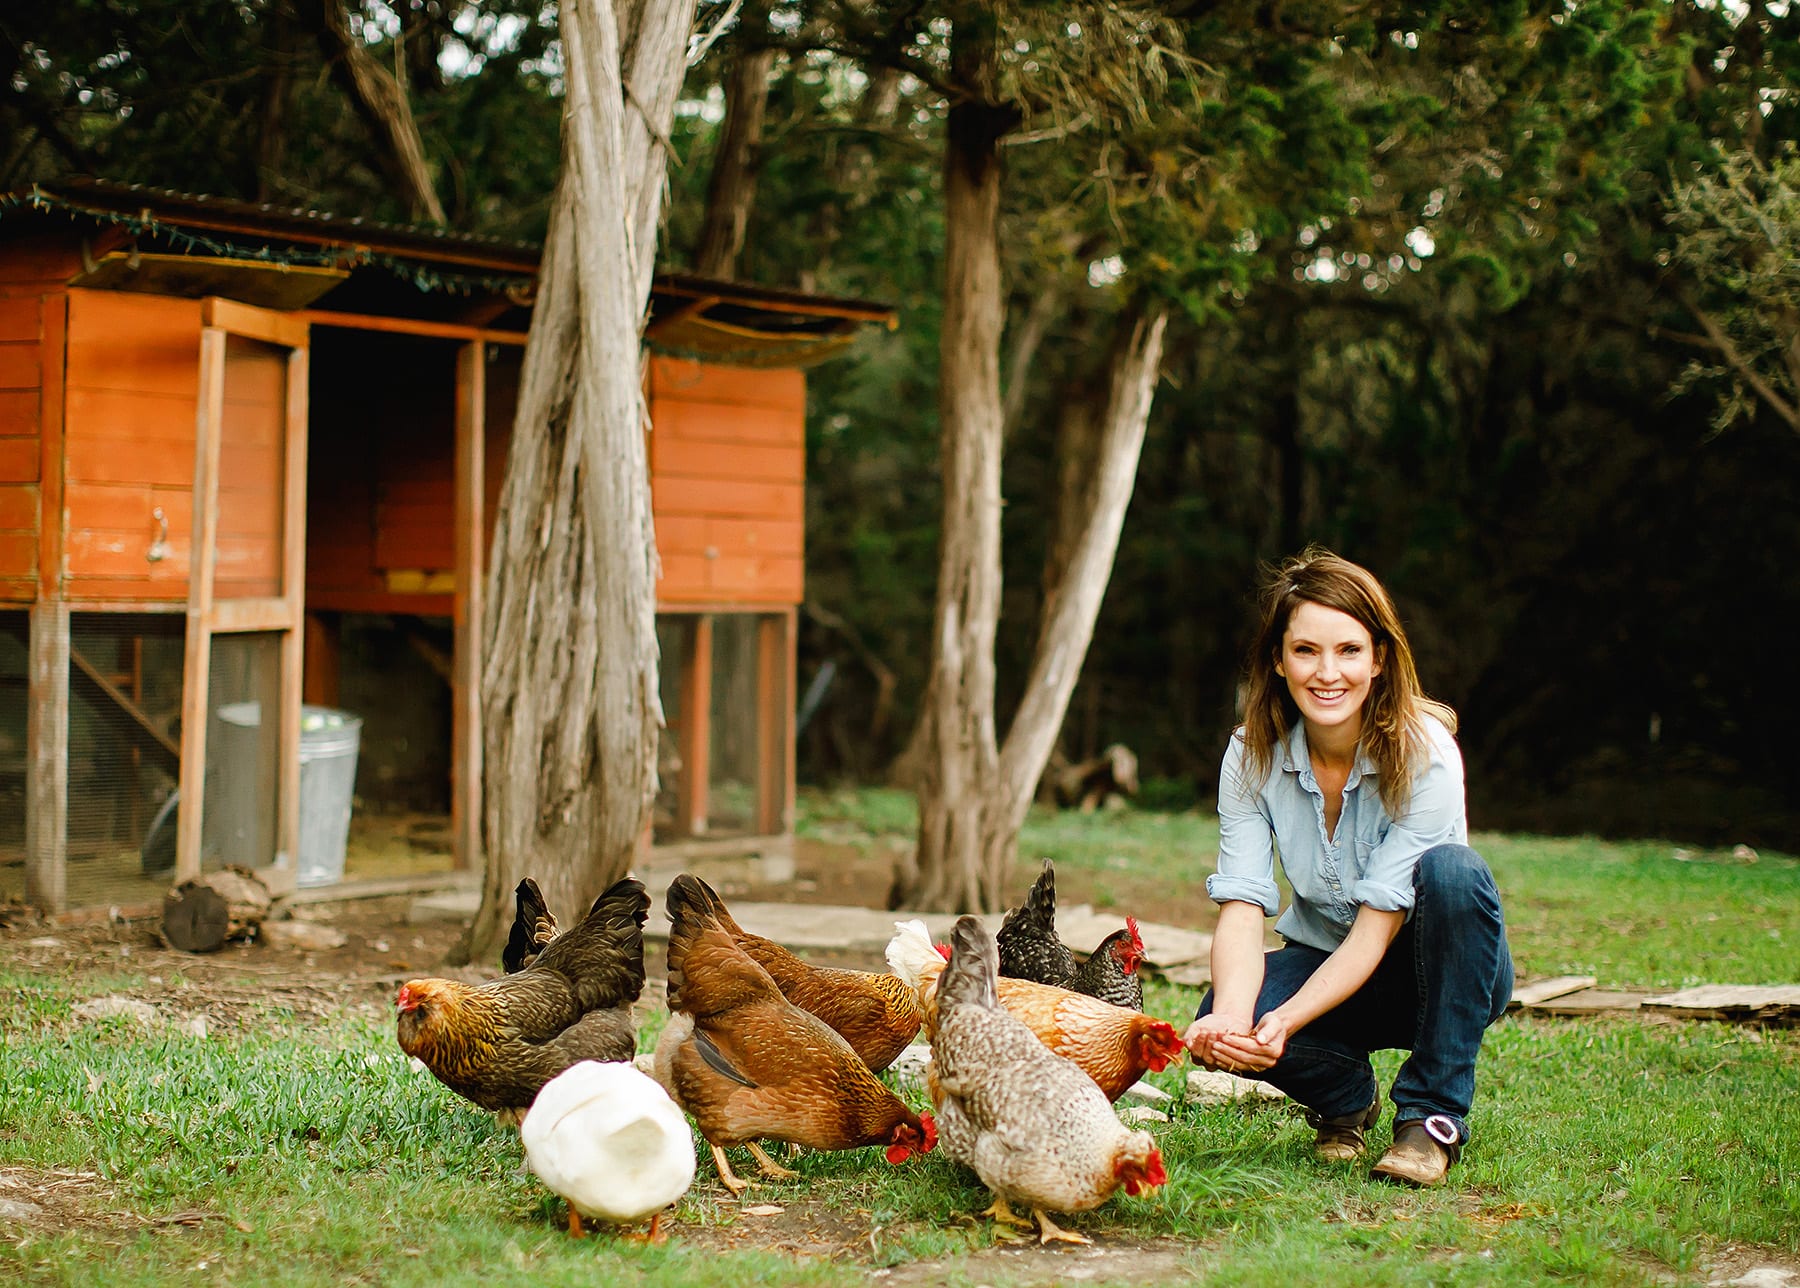 Sigrid and her chickens in Driftwood, Texas